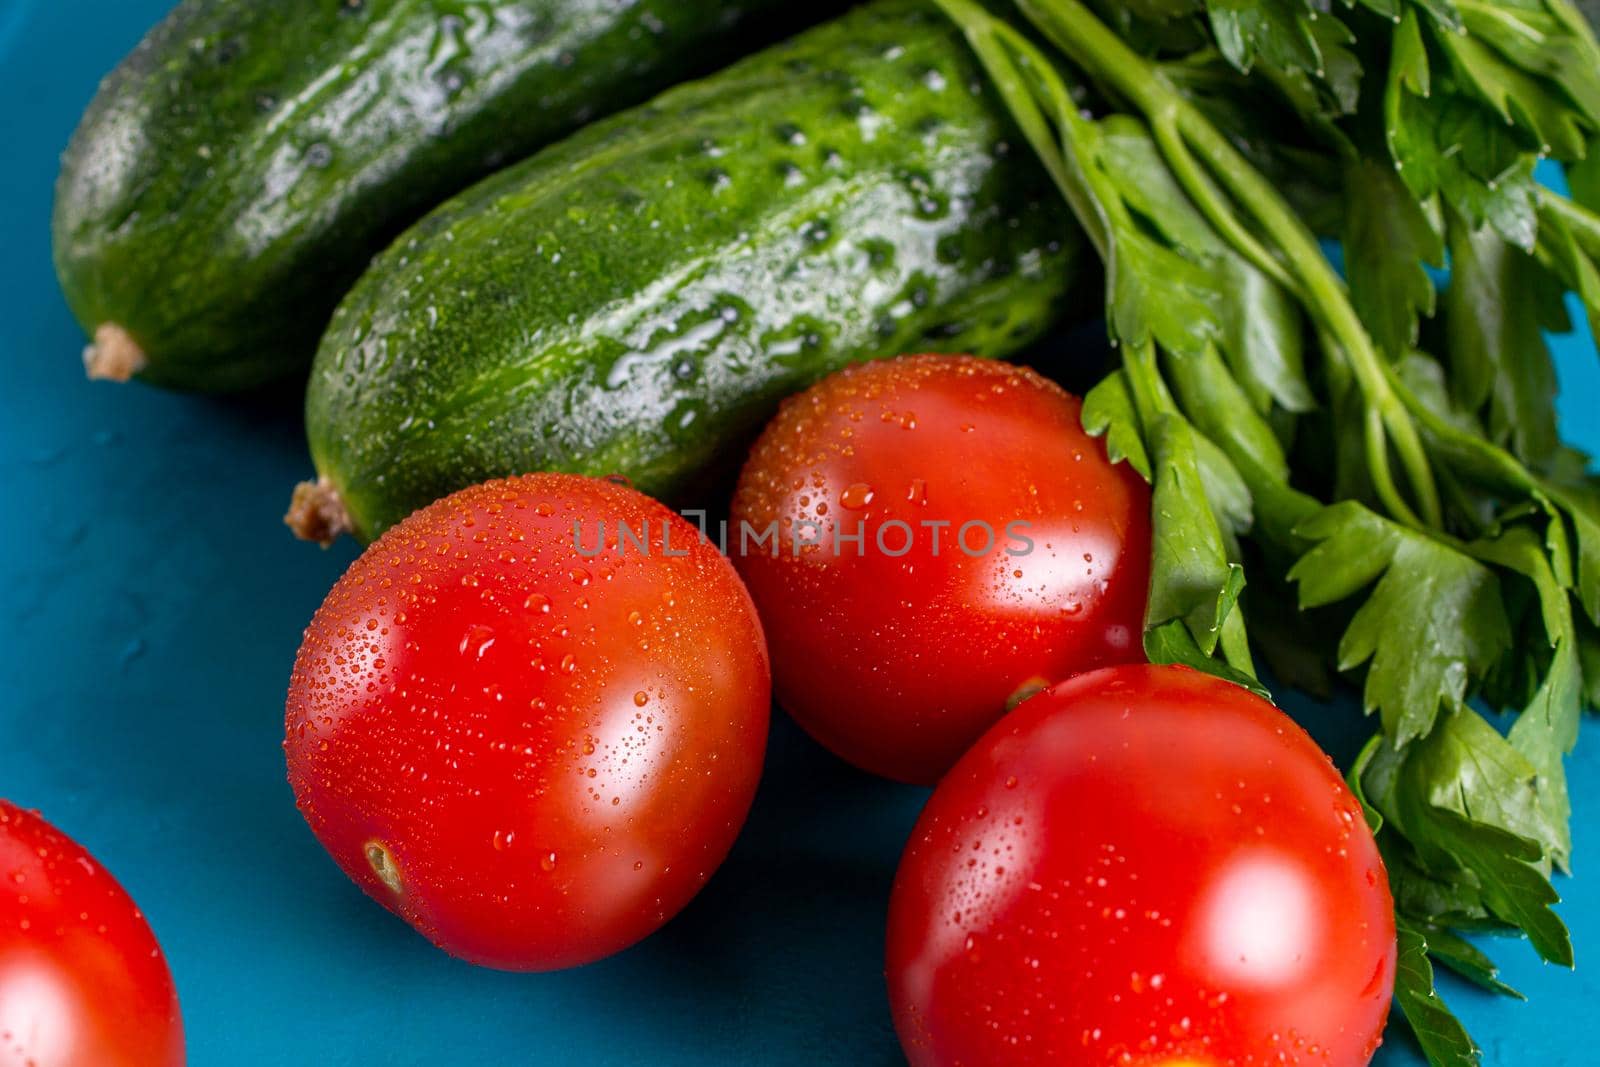 Organic vegetable healthy food tomato and cucumber close-up by bySergPo